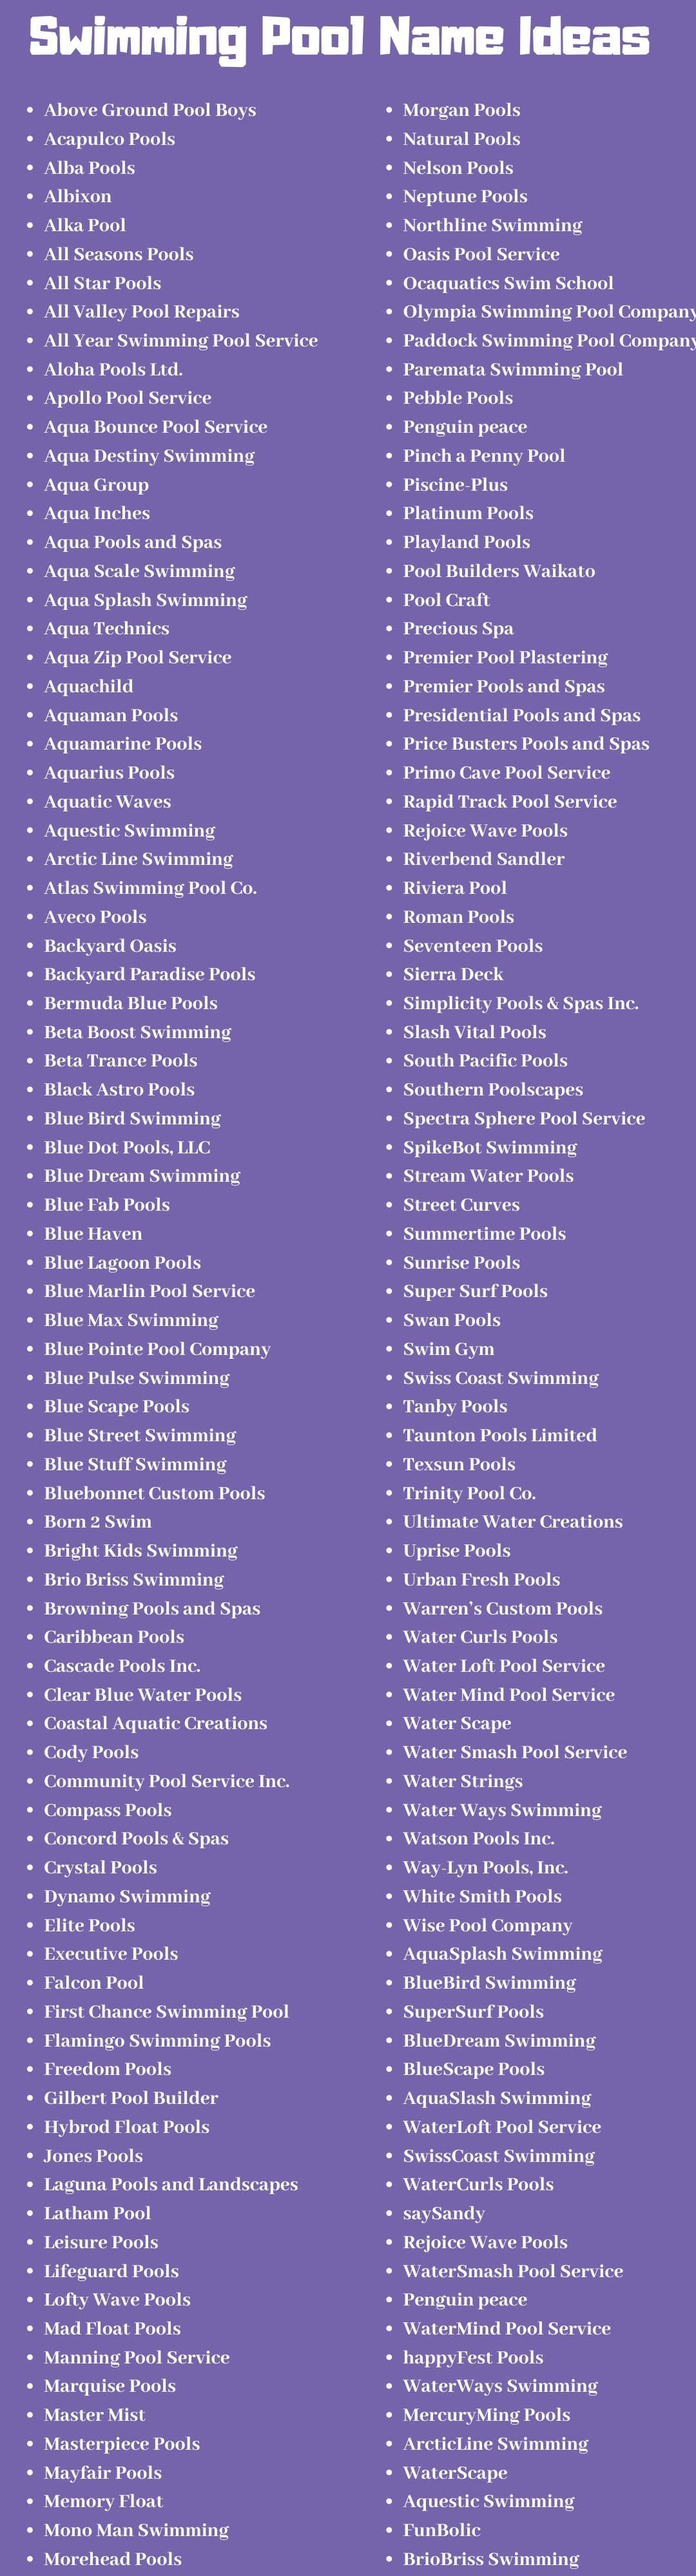 300+ Swimming Pool Name Ideas and Suggestions - Find a Name Fast!